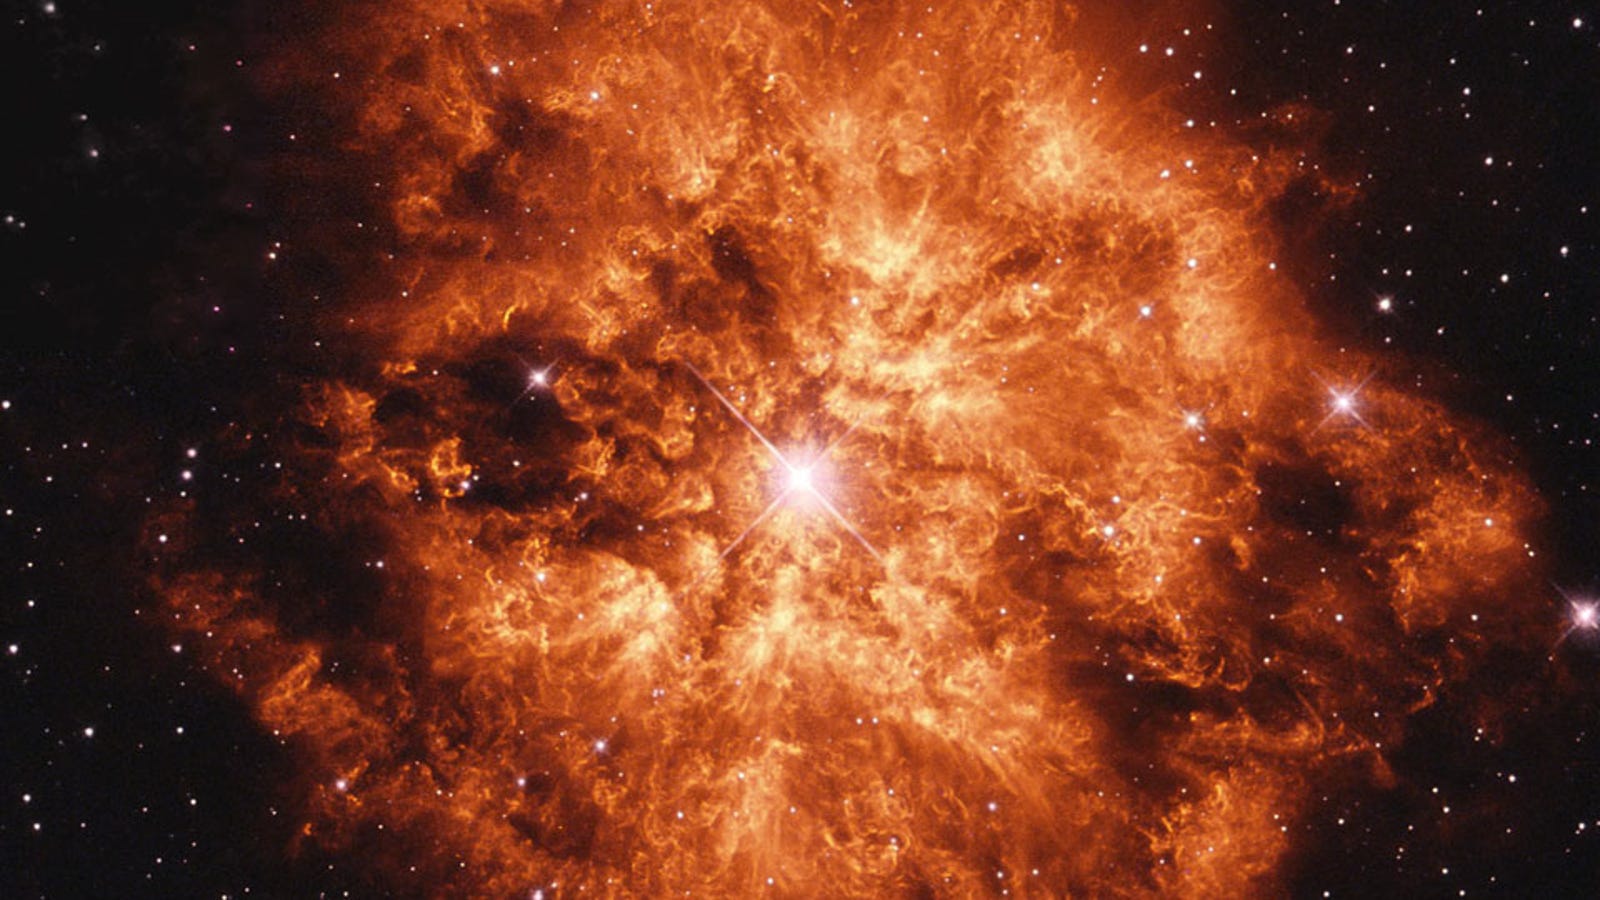 The fieriest star explosion I've ever seen is not even a supernova